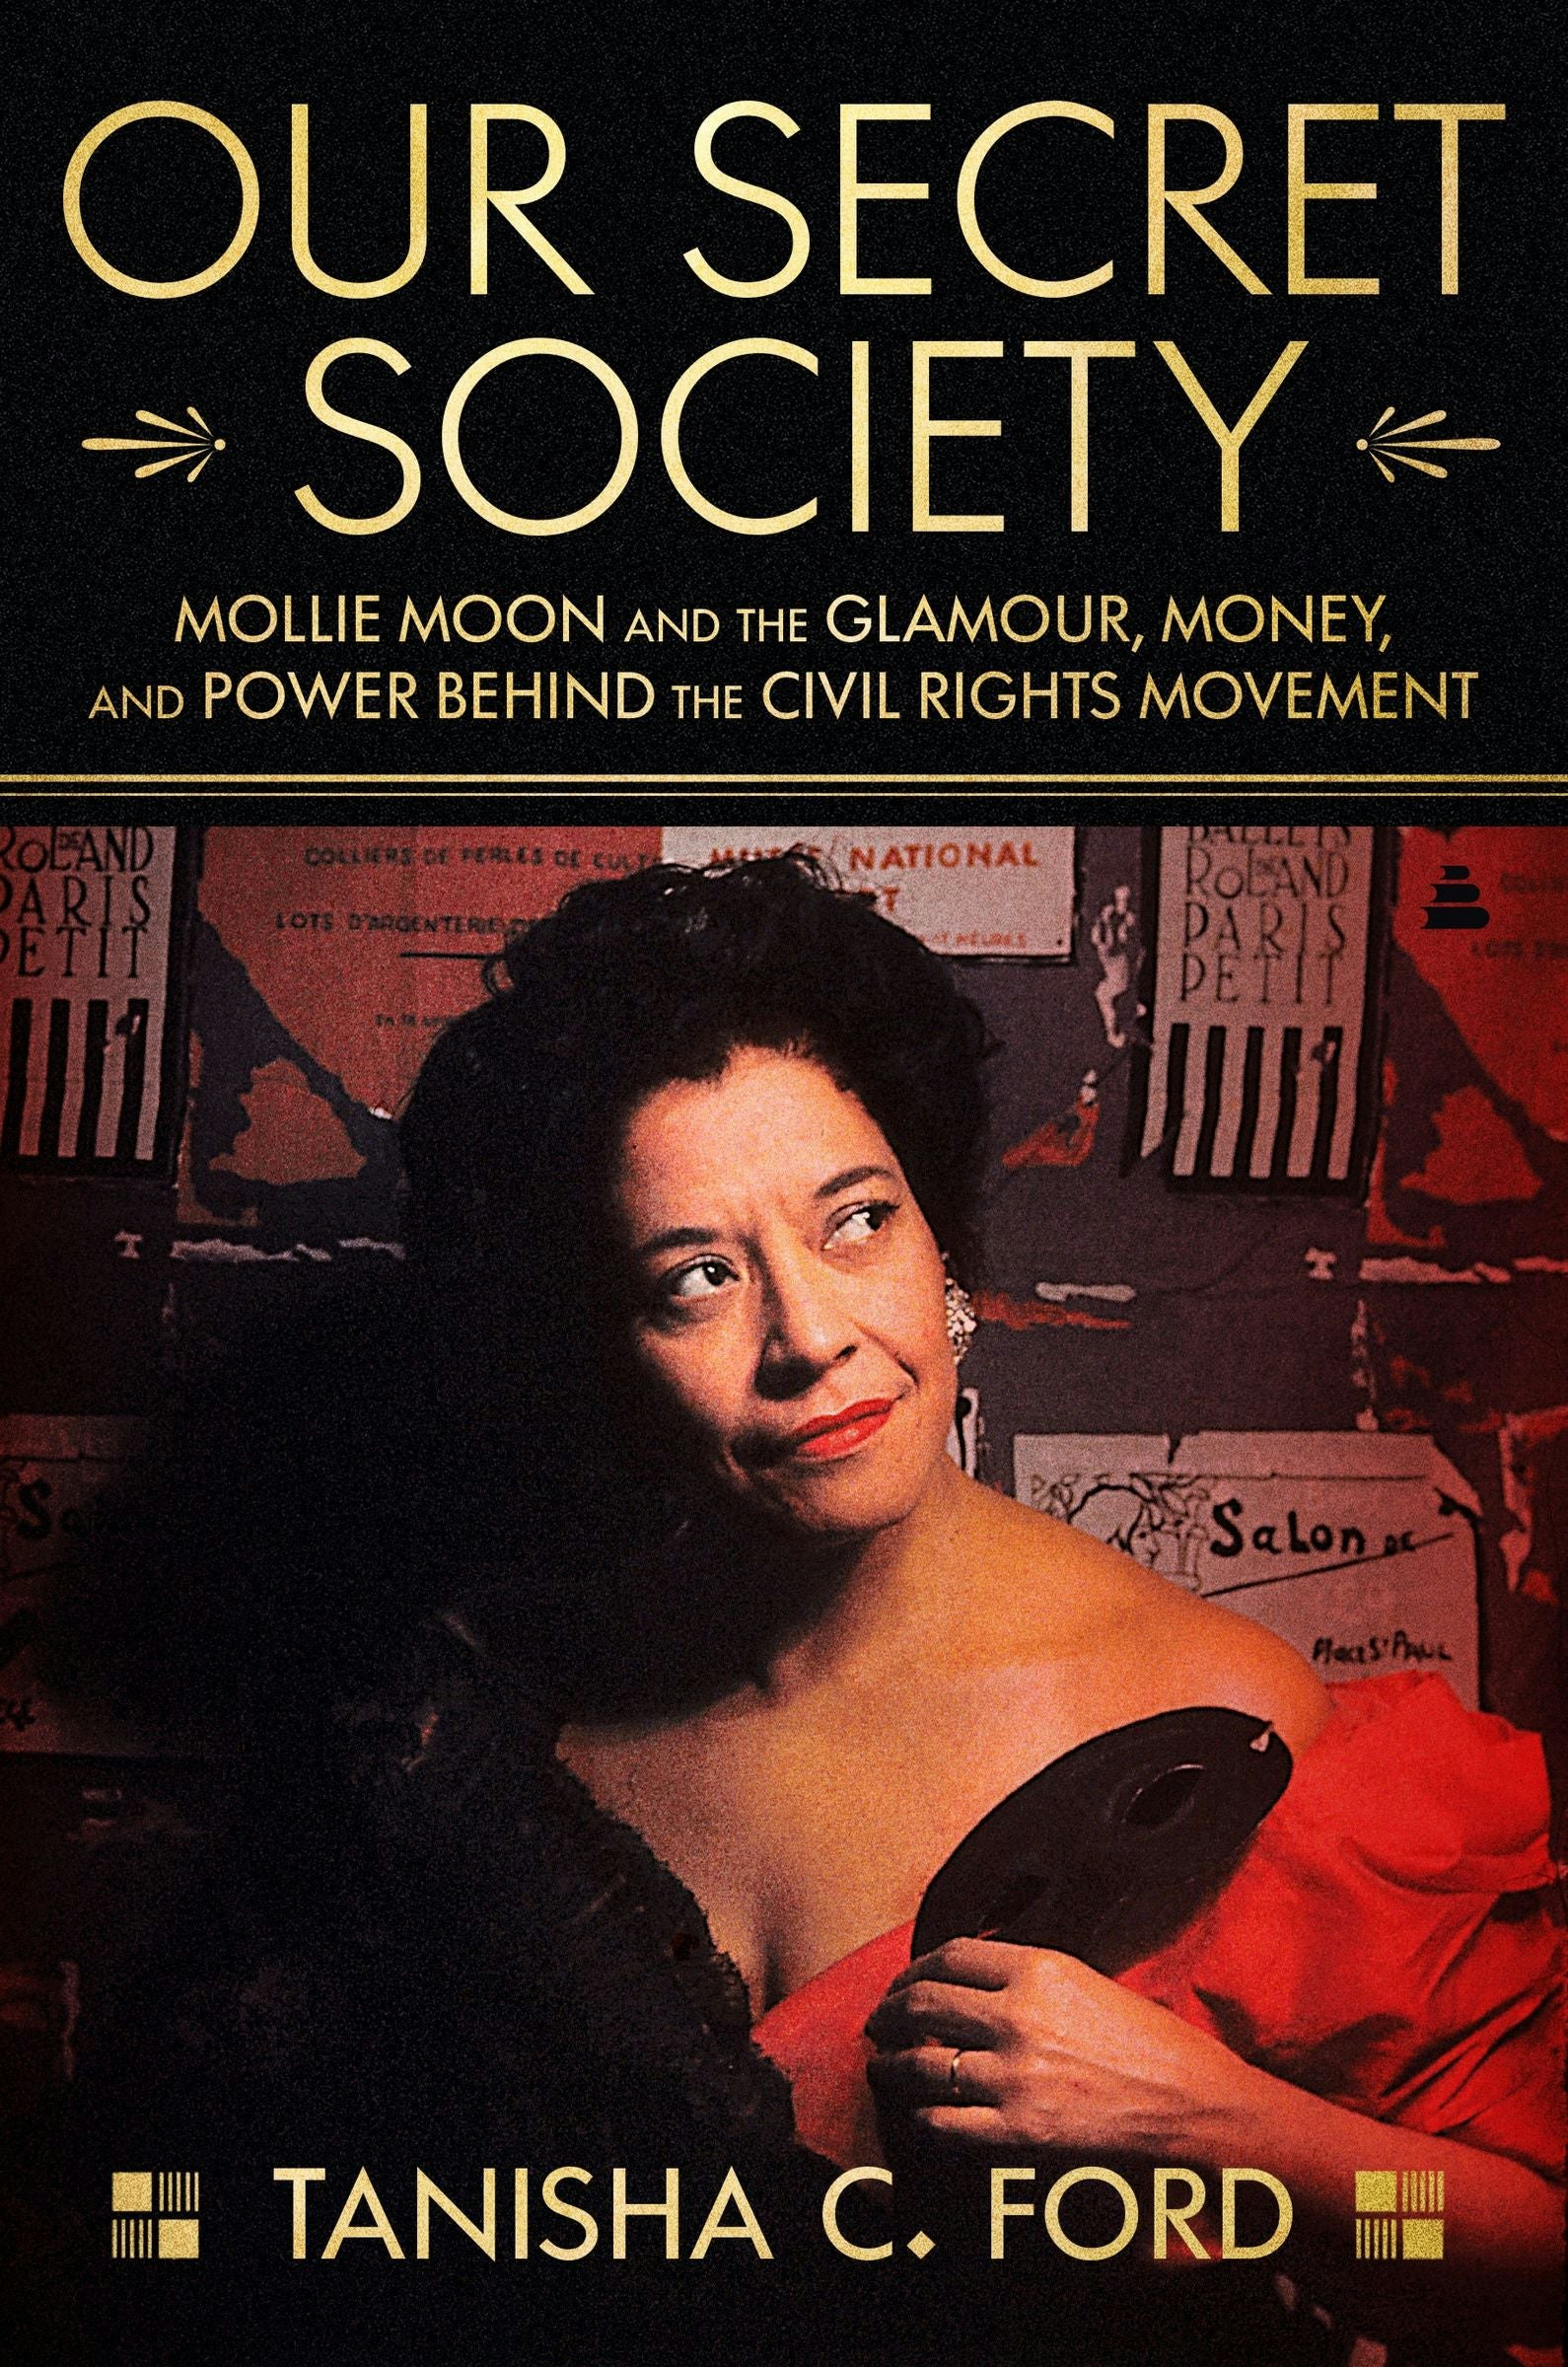 Book cover for Our Secret Society, which shows a middle-aged Mollie Moon in evening wear